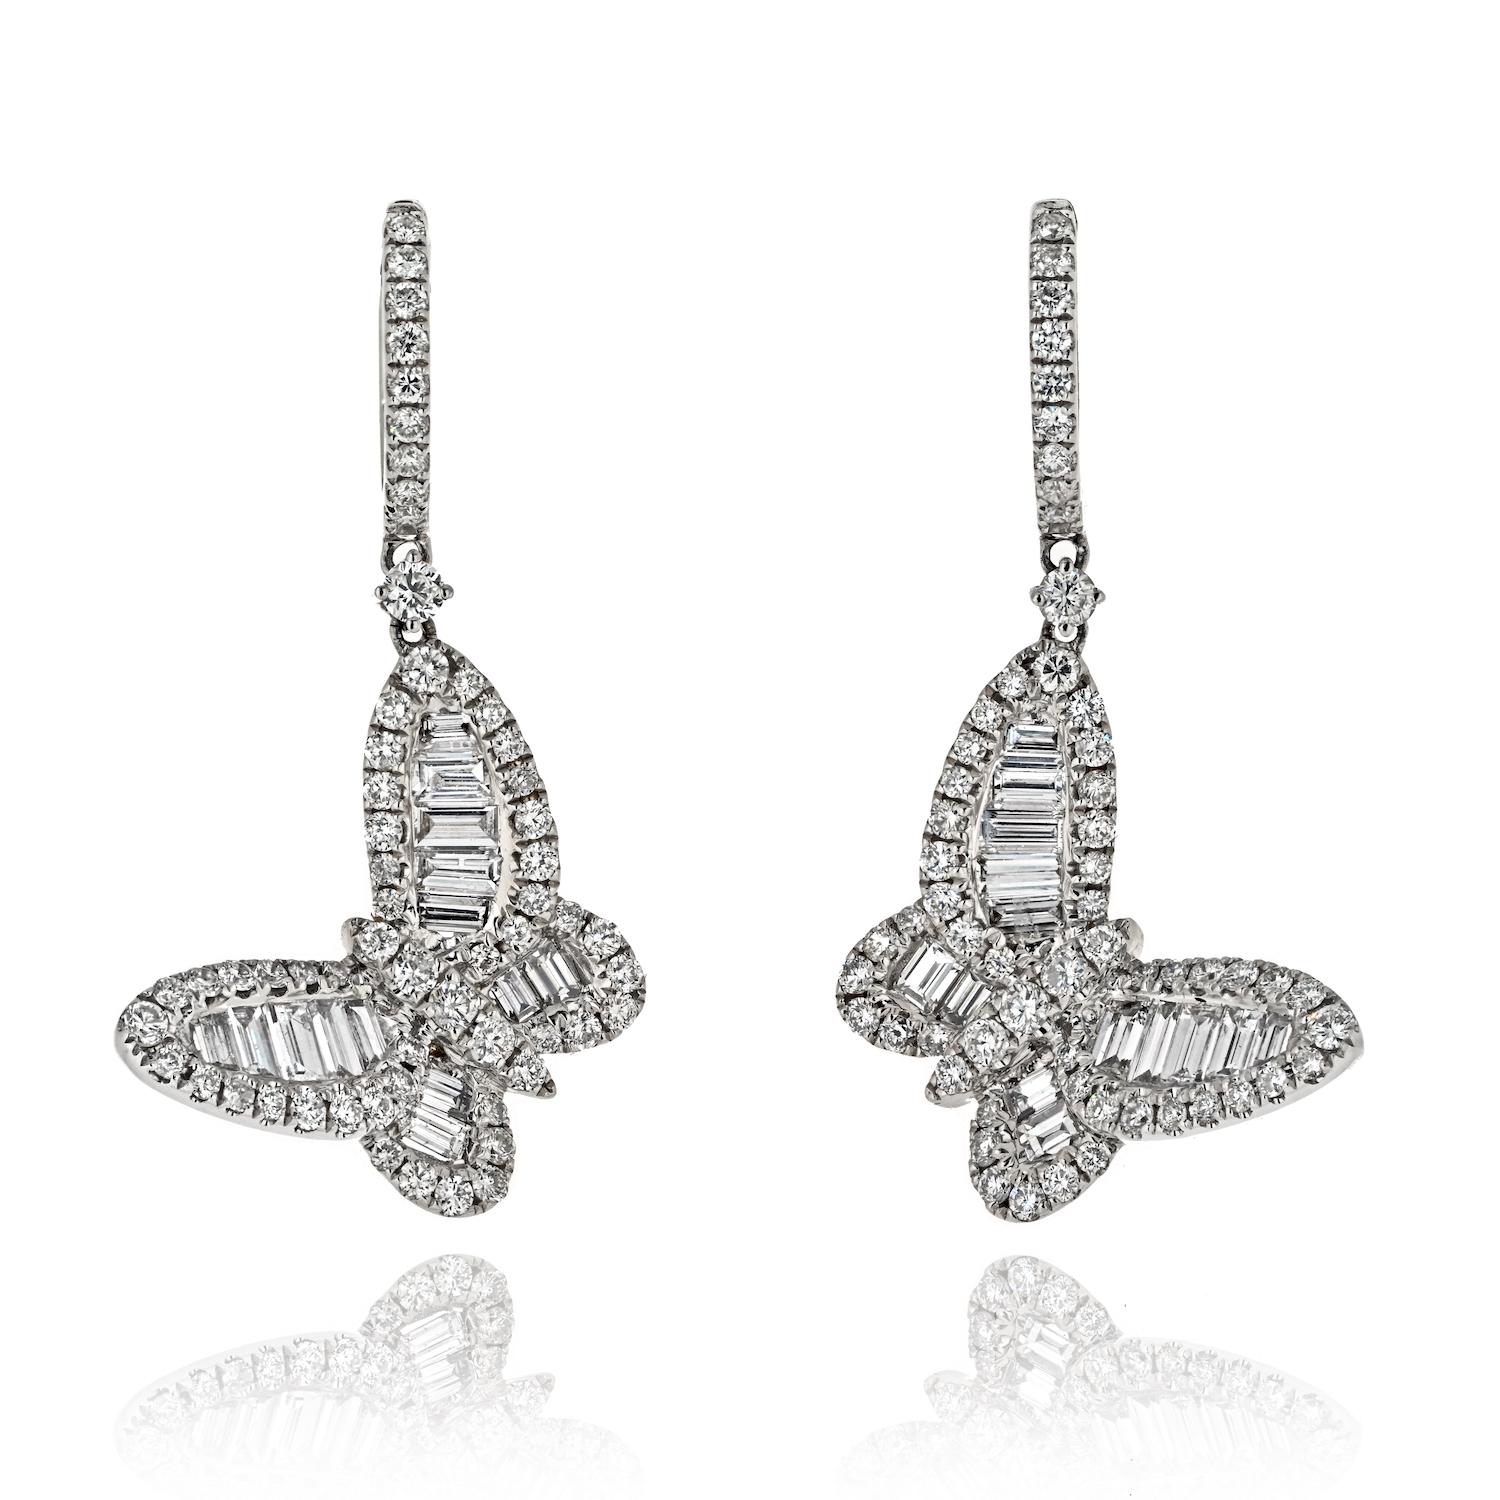 These captivating diamond butterfly earrings are not just an accessory; they are a true work of art transformed into exquisite jewelry. Carefully crafted with meticulous attention to every detail, these earrings are not only the perfect gift for